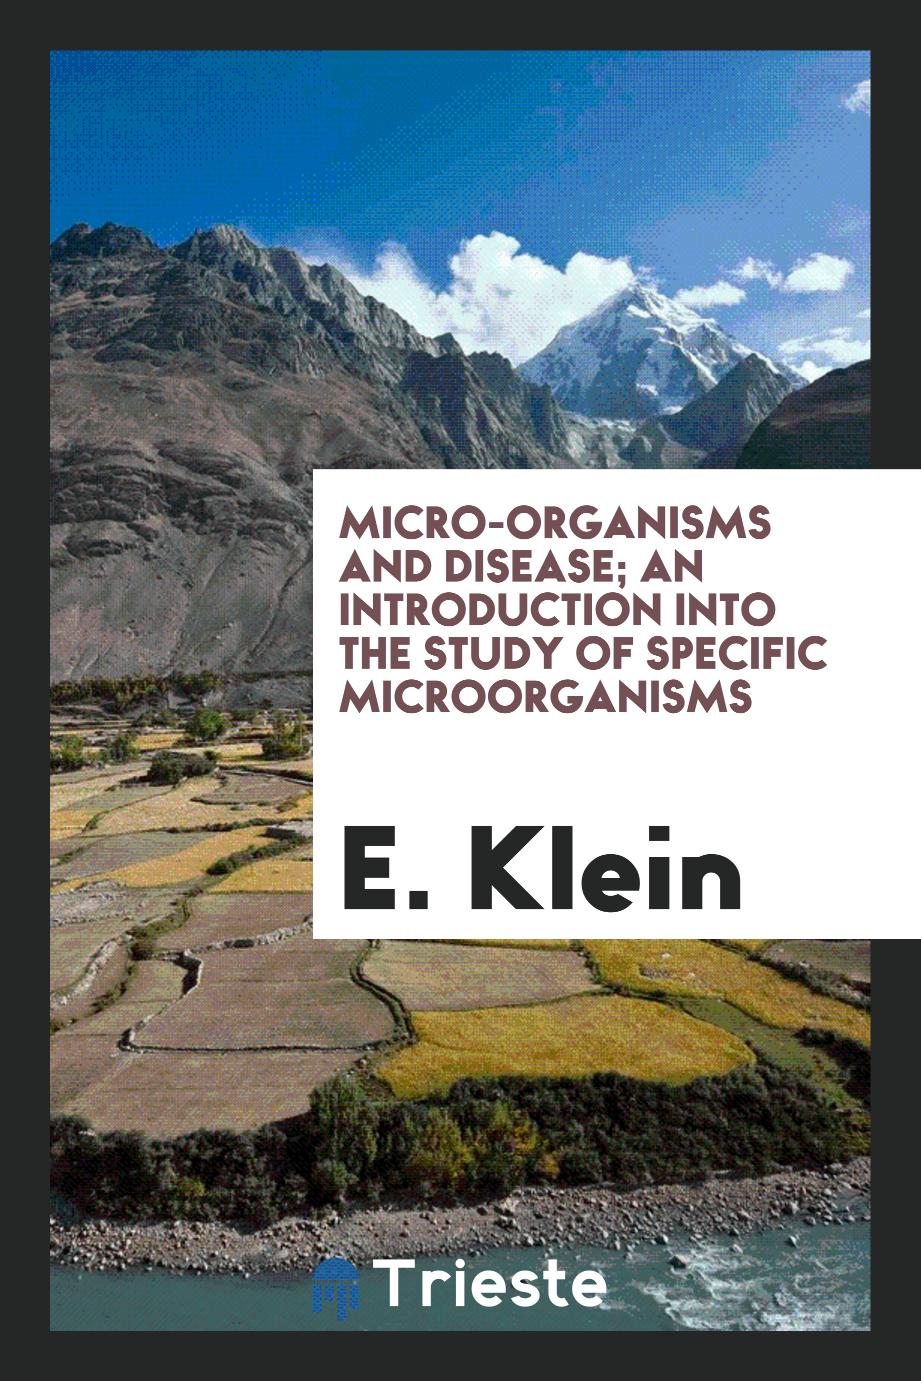 Micro-organisms and disease; an introduction into the study of specific microorganisms